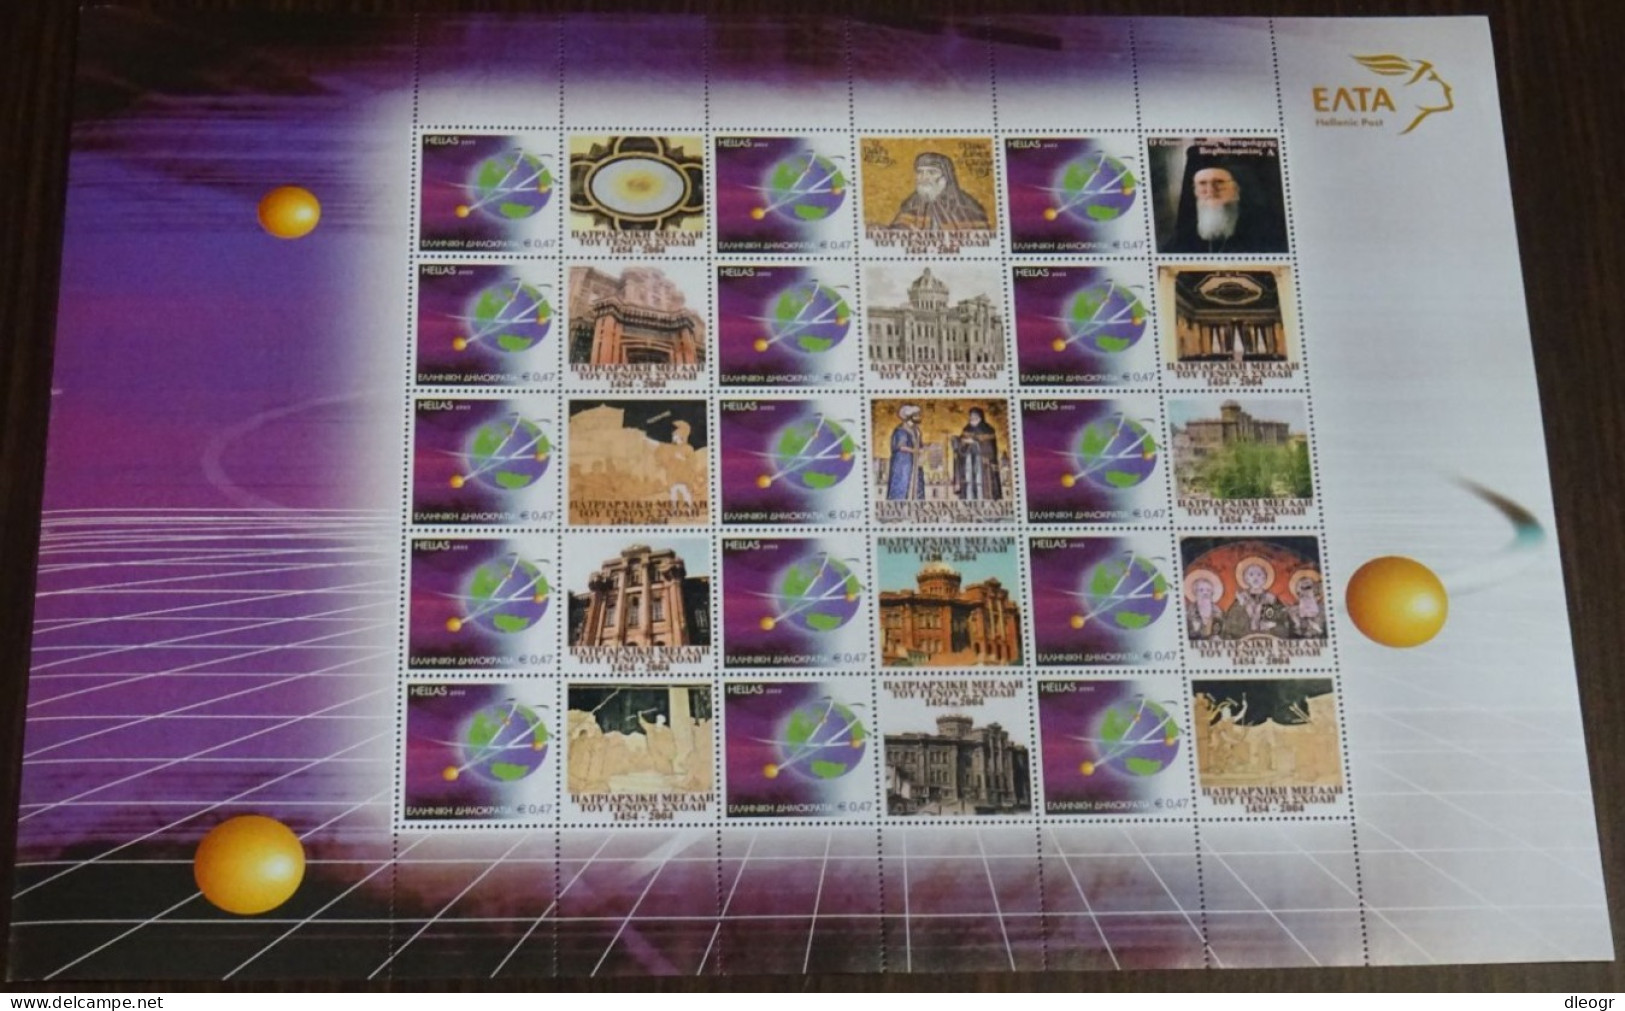 Greece 2004 Nation's Great School Personalized Sheet MNH - Nuevos